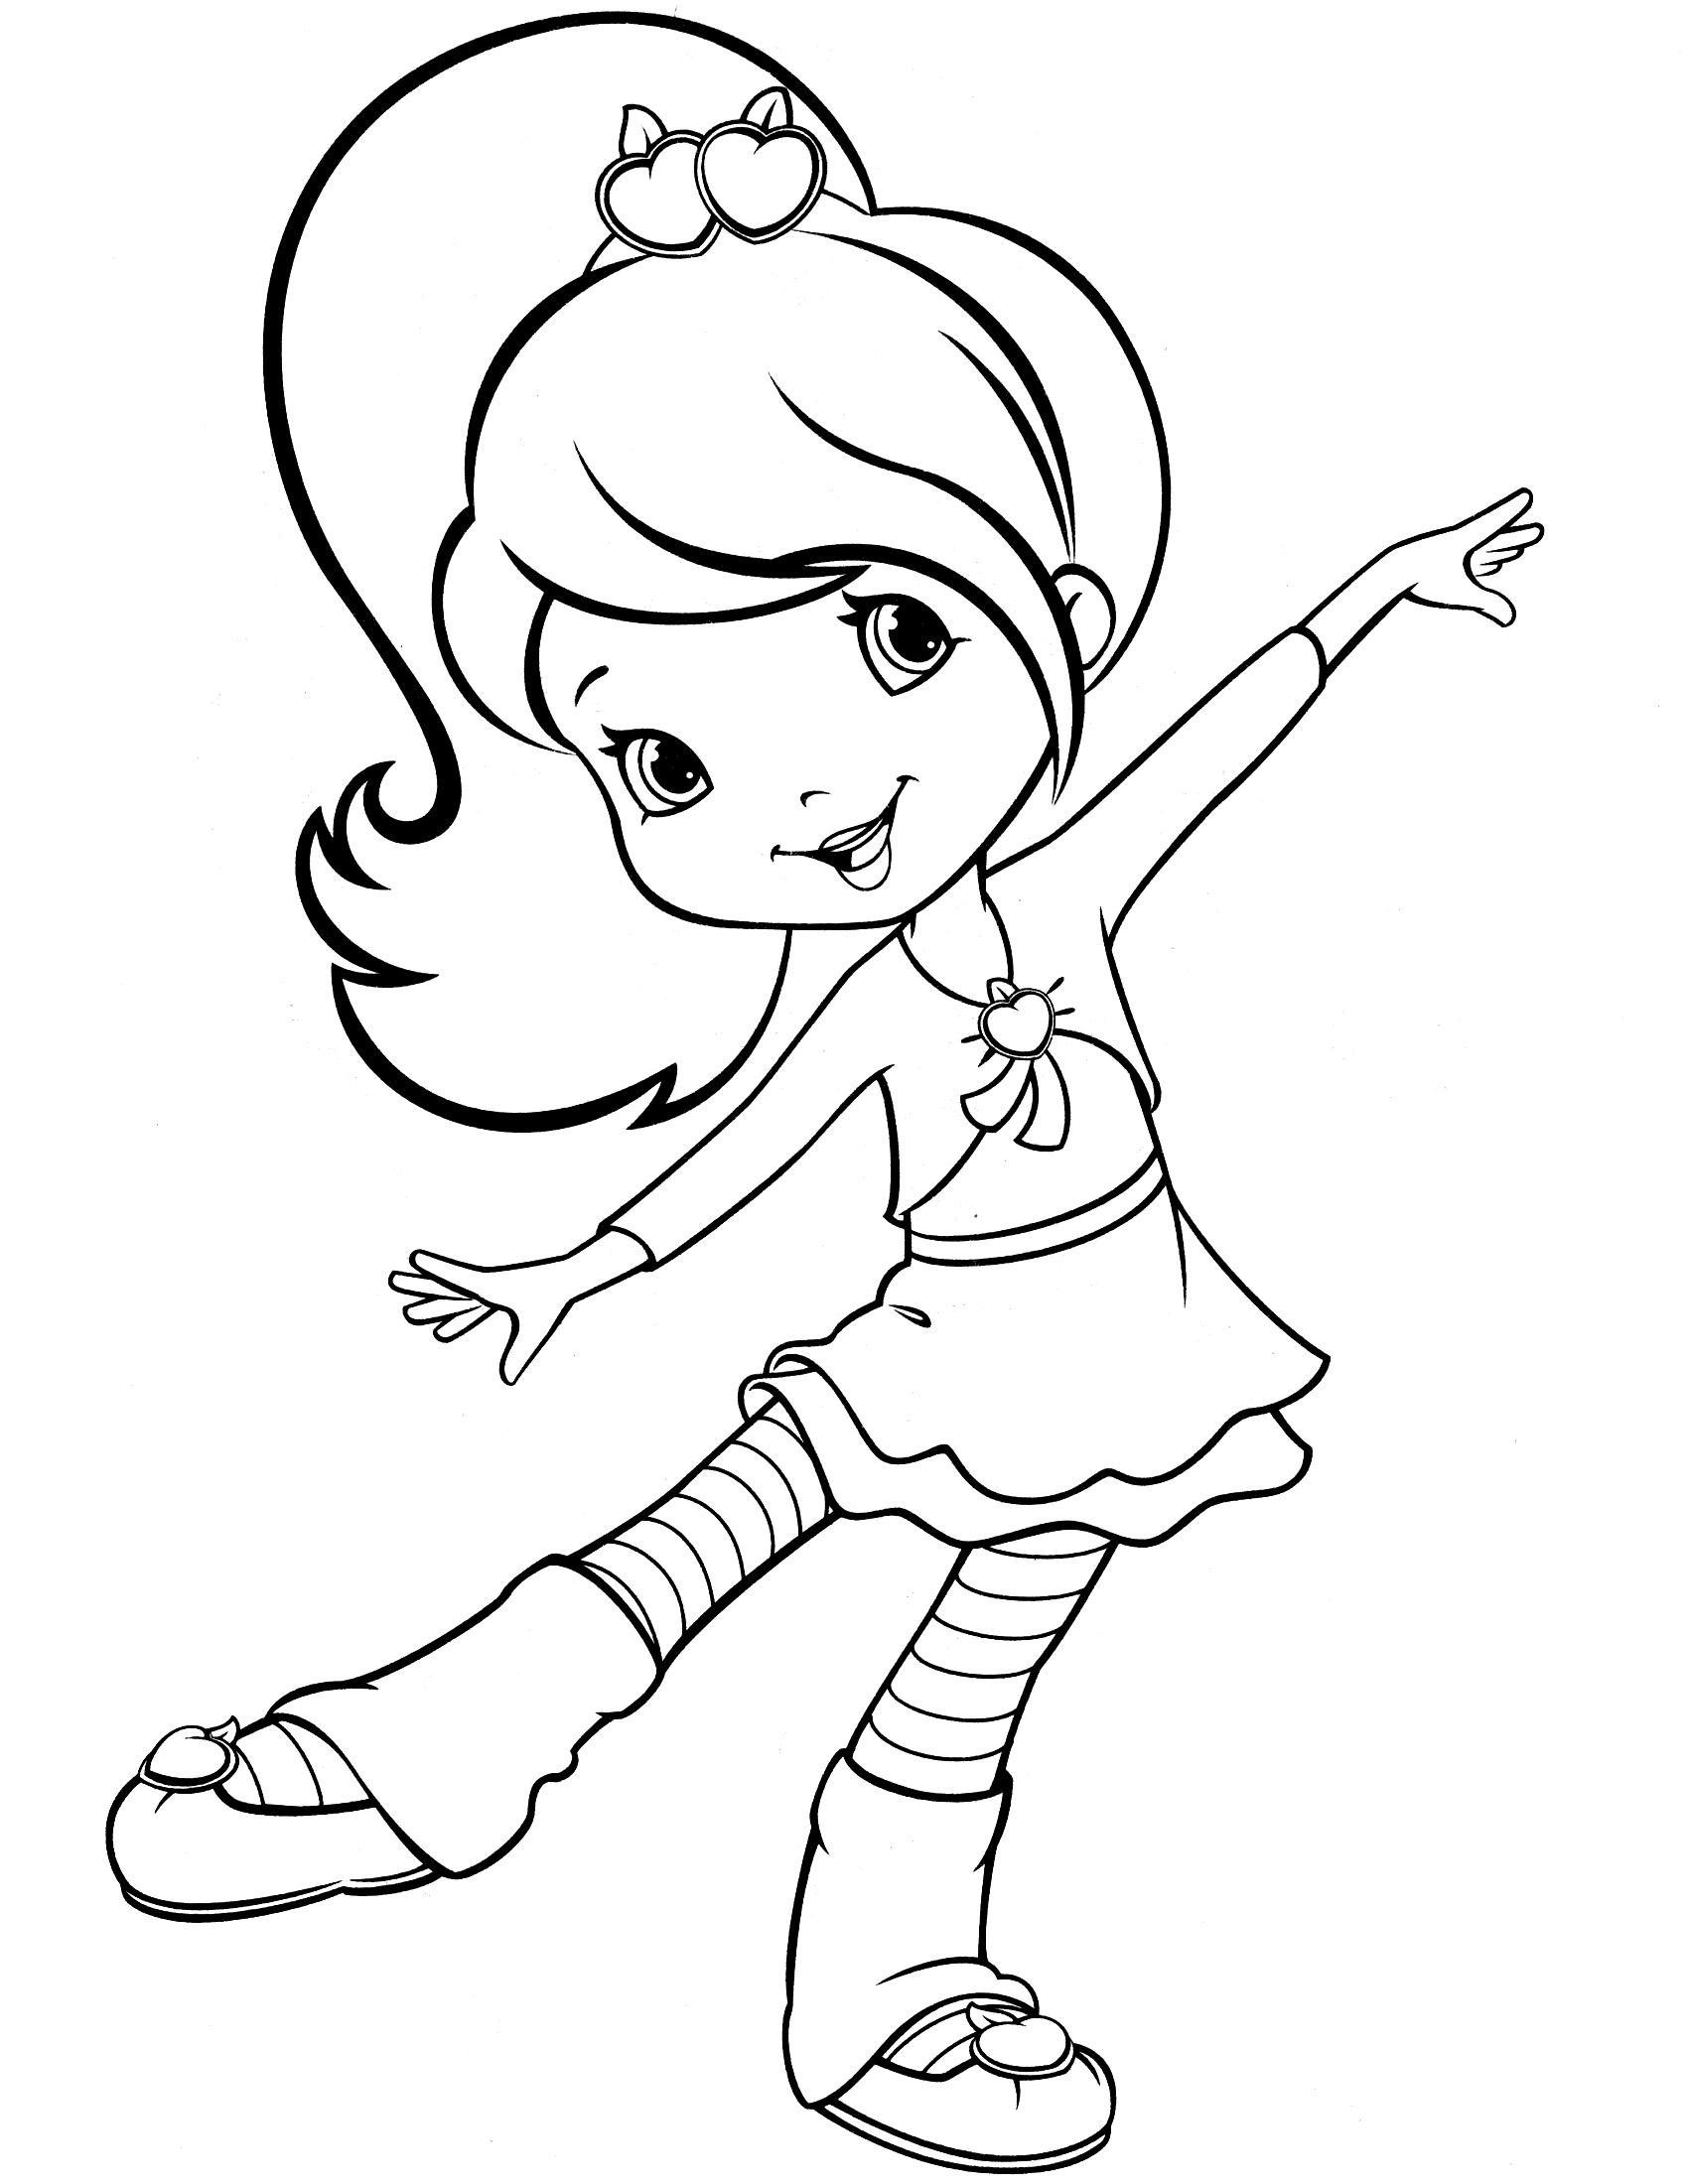  Strawberry Shortcake Coloring Pages / Cool coloring pages / 27